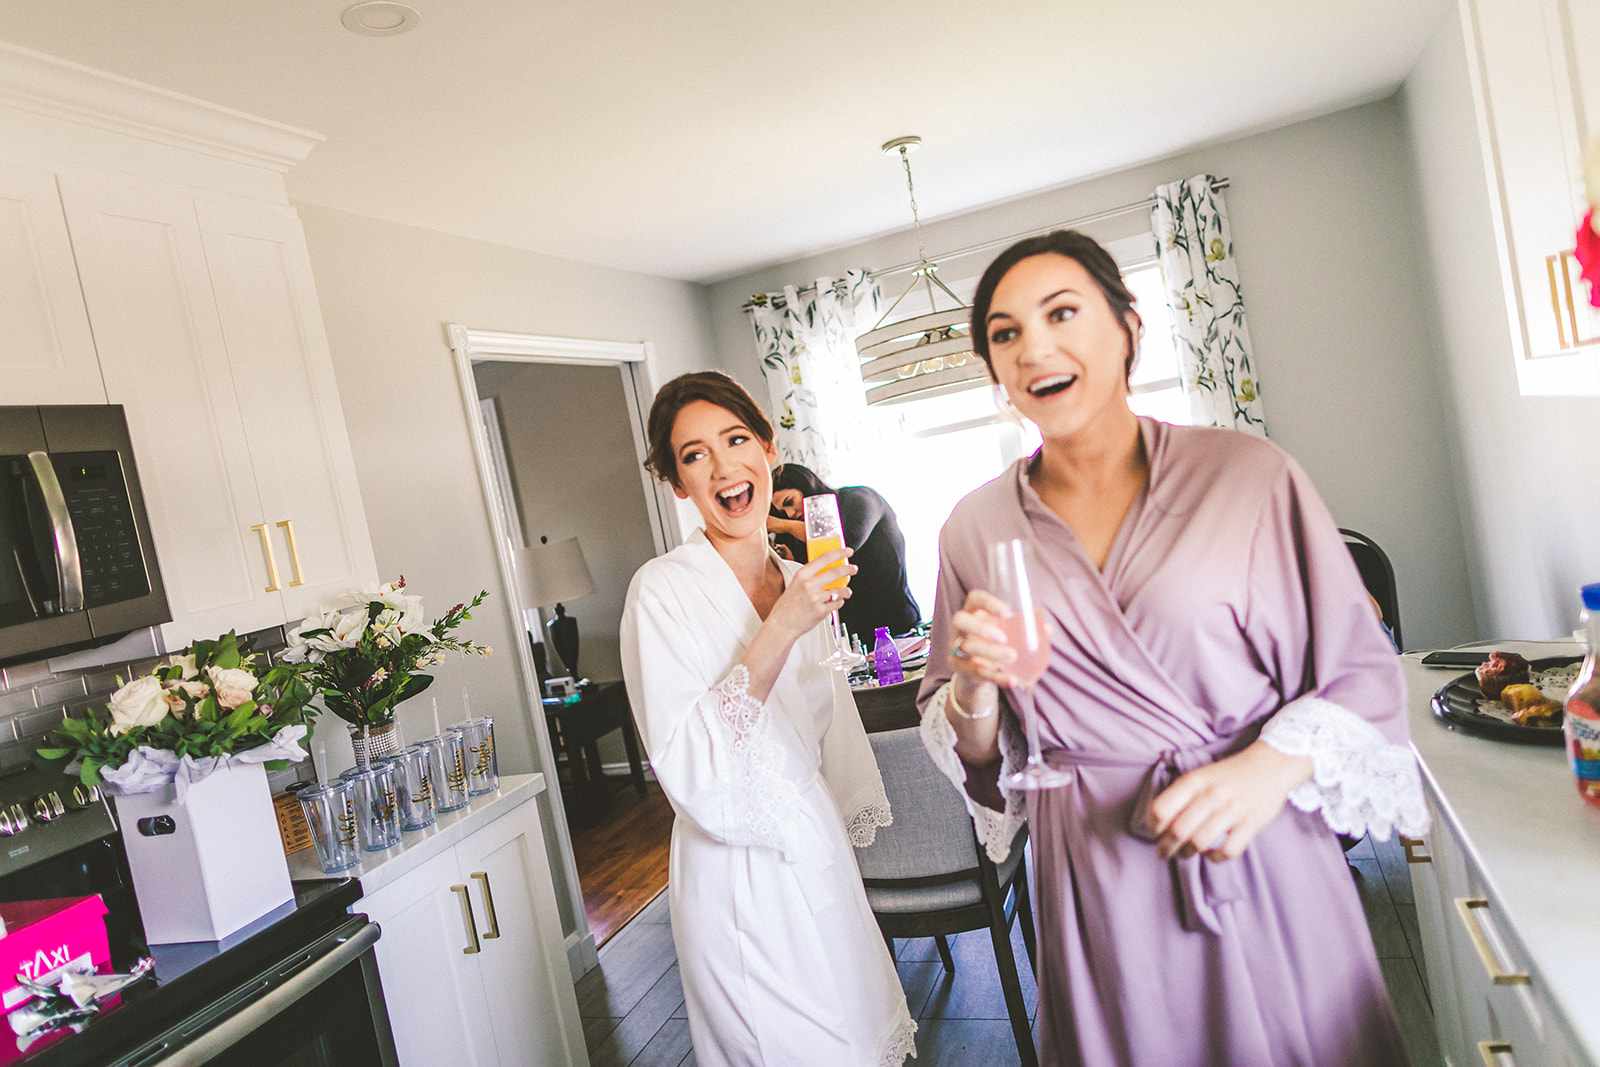 Bride getting ready in kitchen with friends